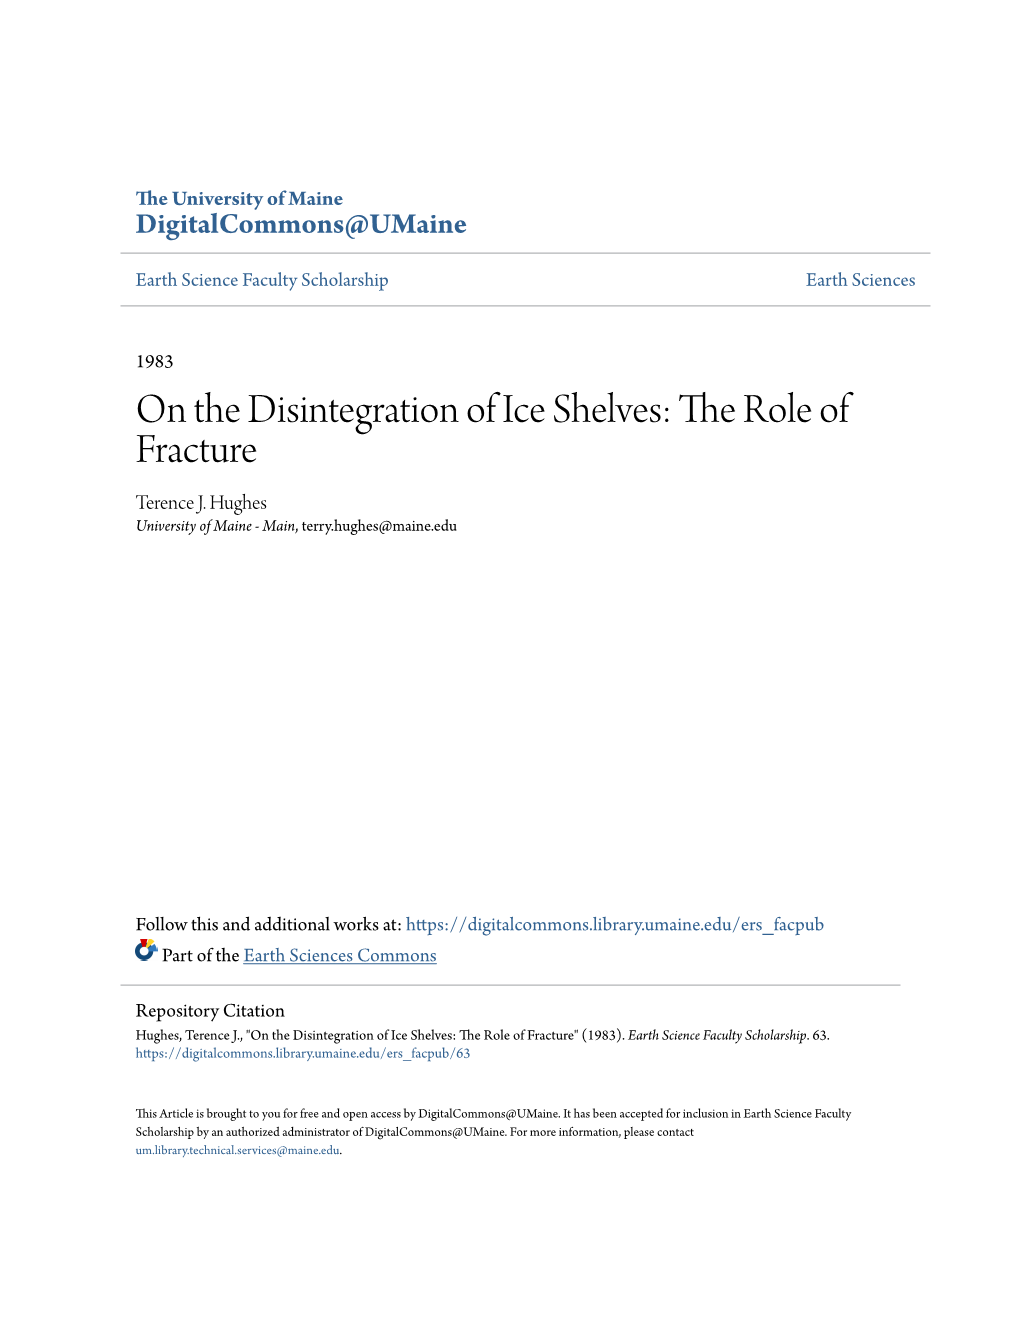 On the Disintegration of Ice Shelves: the Role of Fracture Terence J